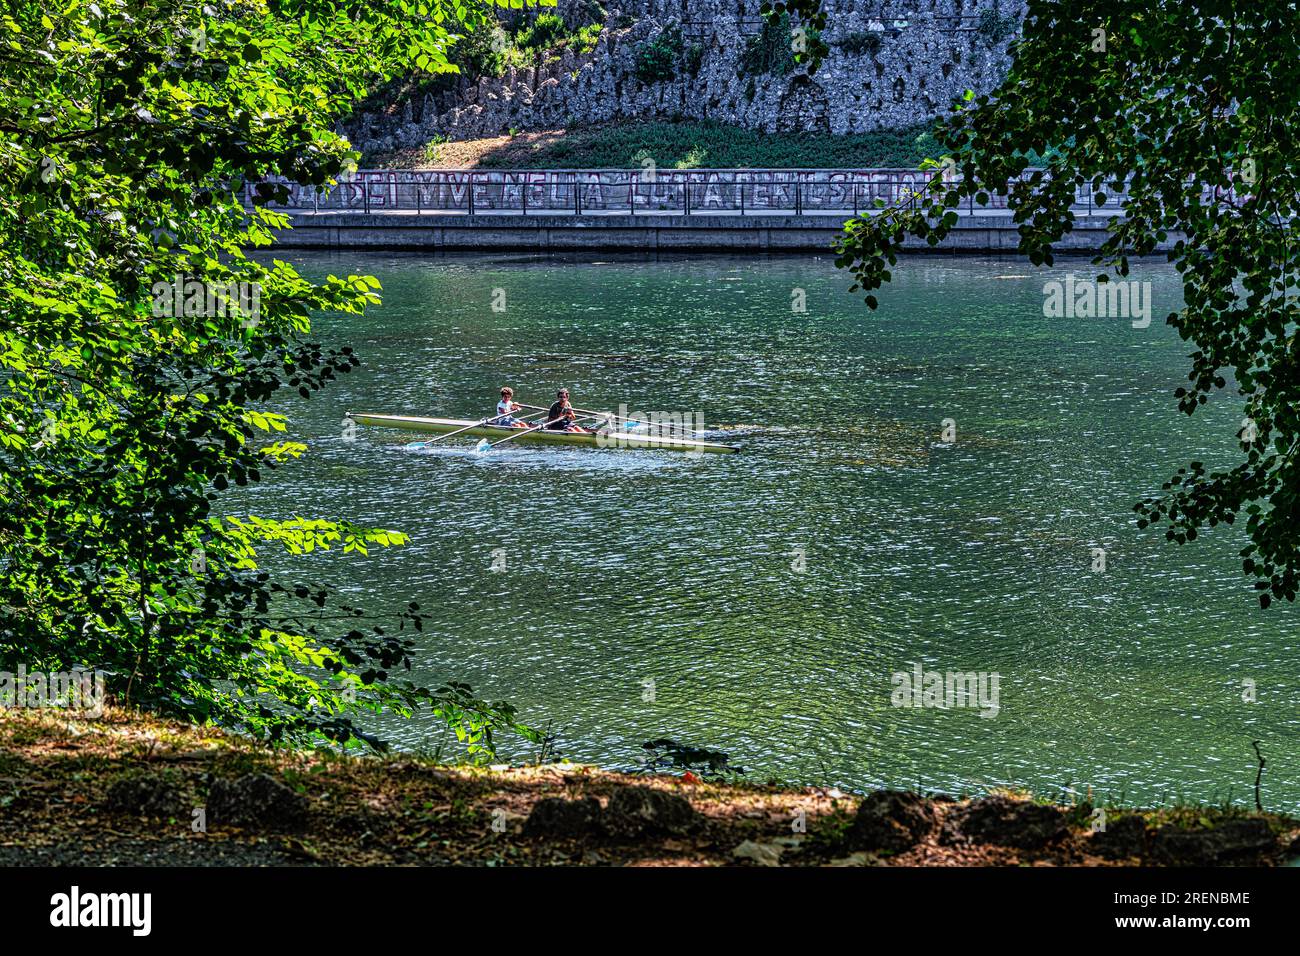 Rowing activities on the Po river in Turin, in the background the Principessa Isabella Bridge. Turin, Piedmont, Italy, Europe Stock Photo